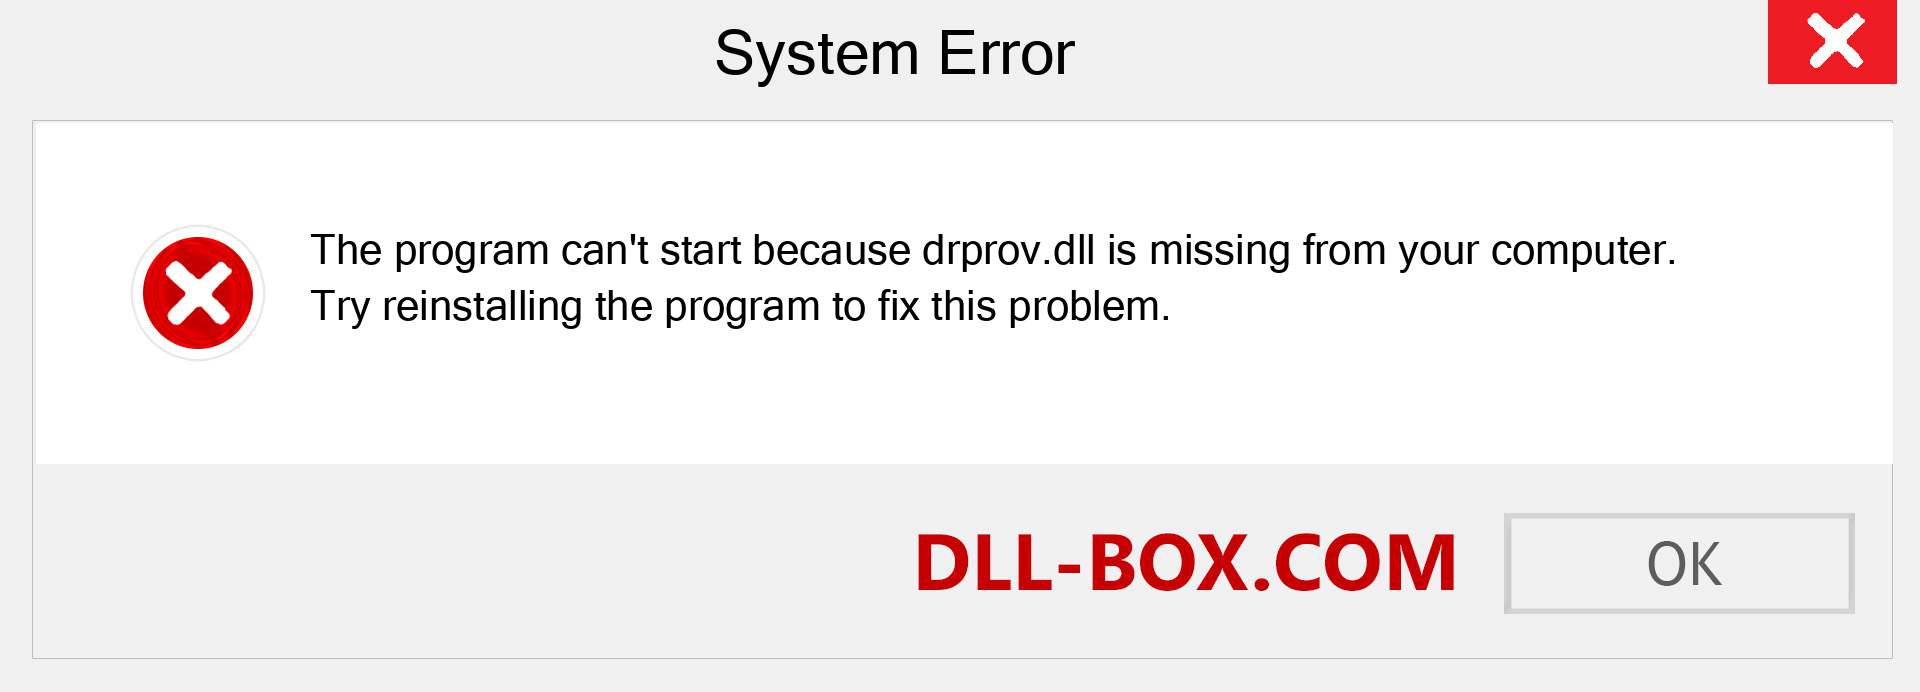  drprov.dll file is missing?. Download for Windows 7, 8, 10 - Fix  drprov dll Missing Error on Windows, photos, images